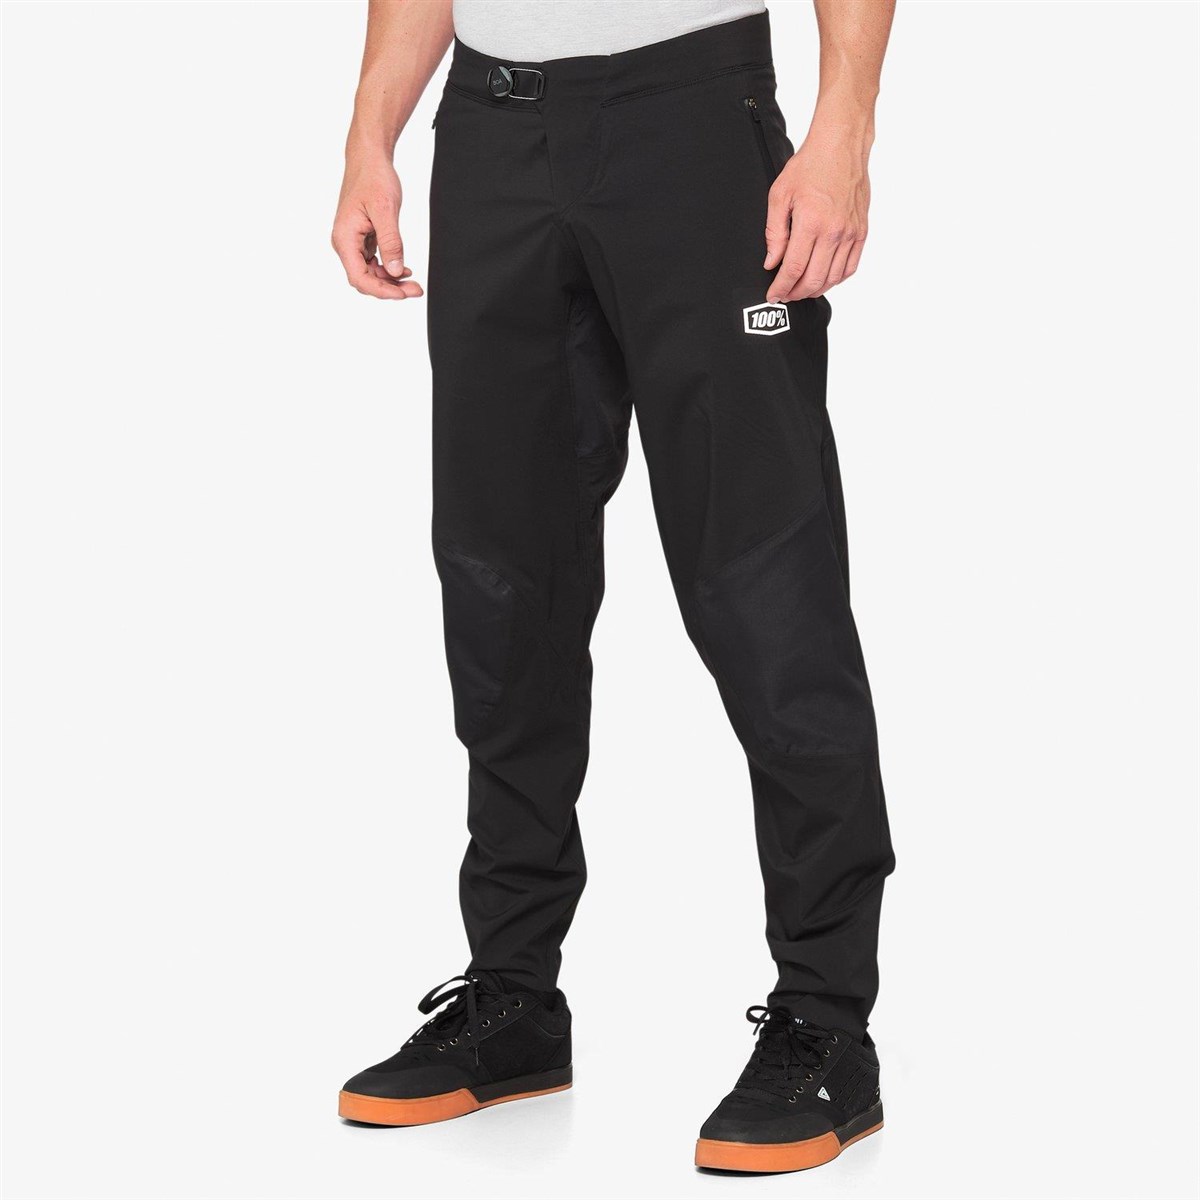 100% Hydromatic MTB Cycling Trousers product image